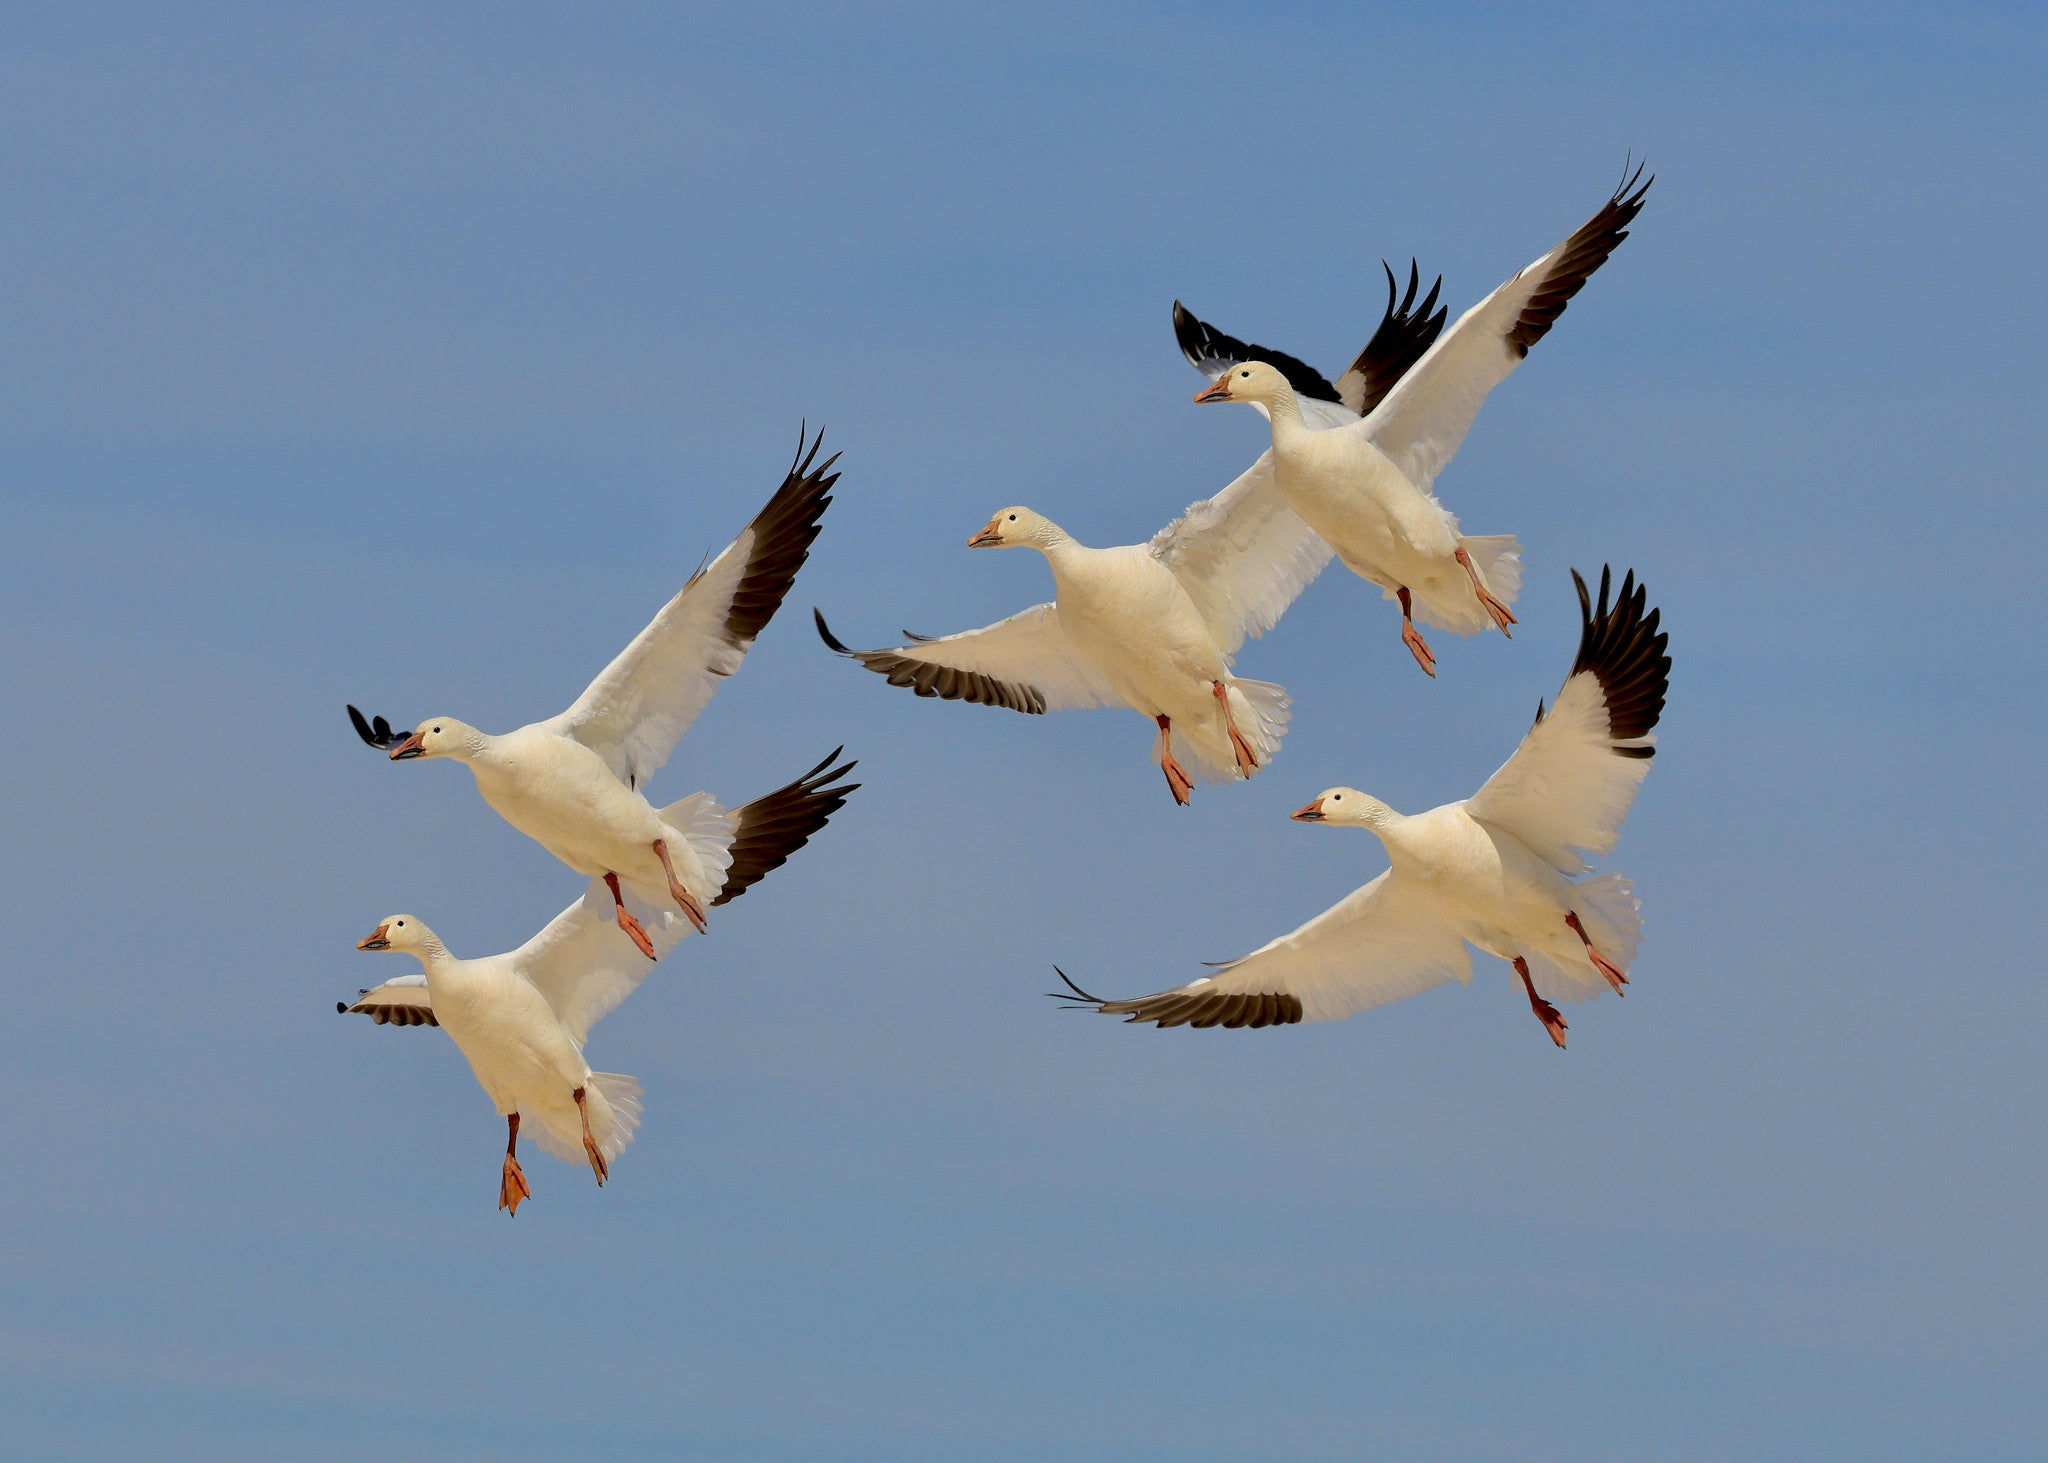 Five seagull's suspended in flight.